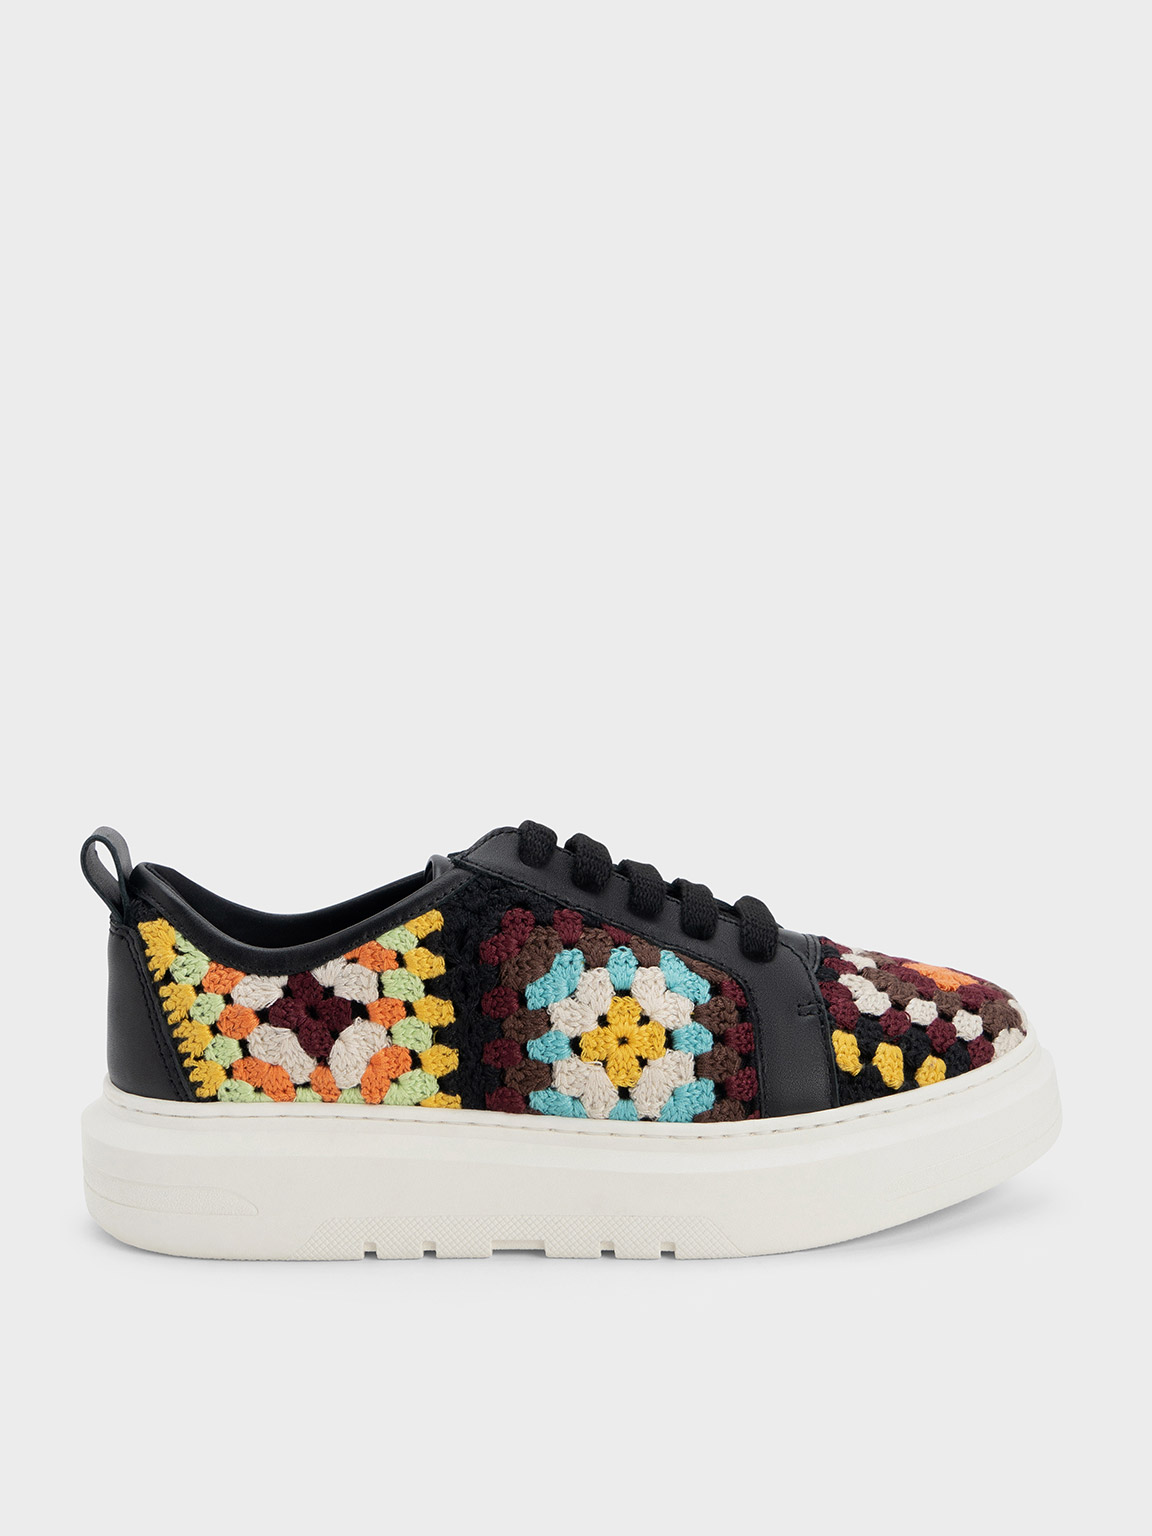 Floral Crochet & Leather Sneakers